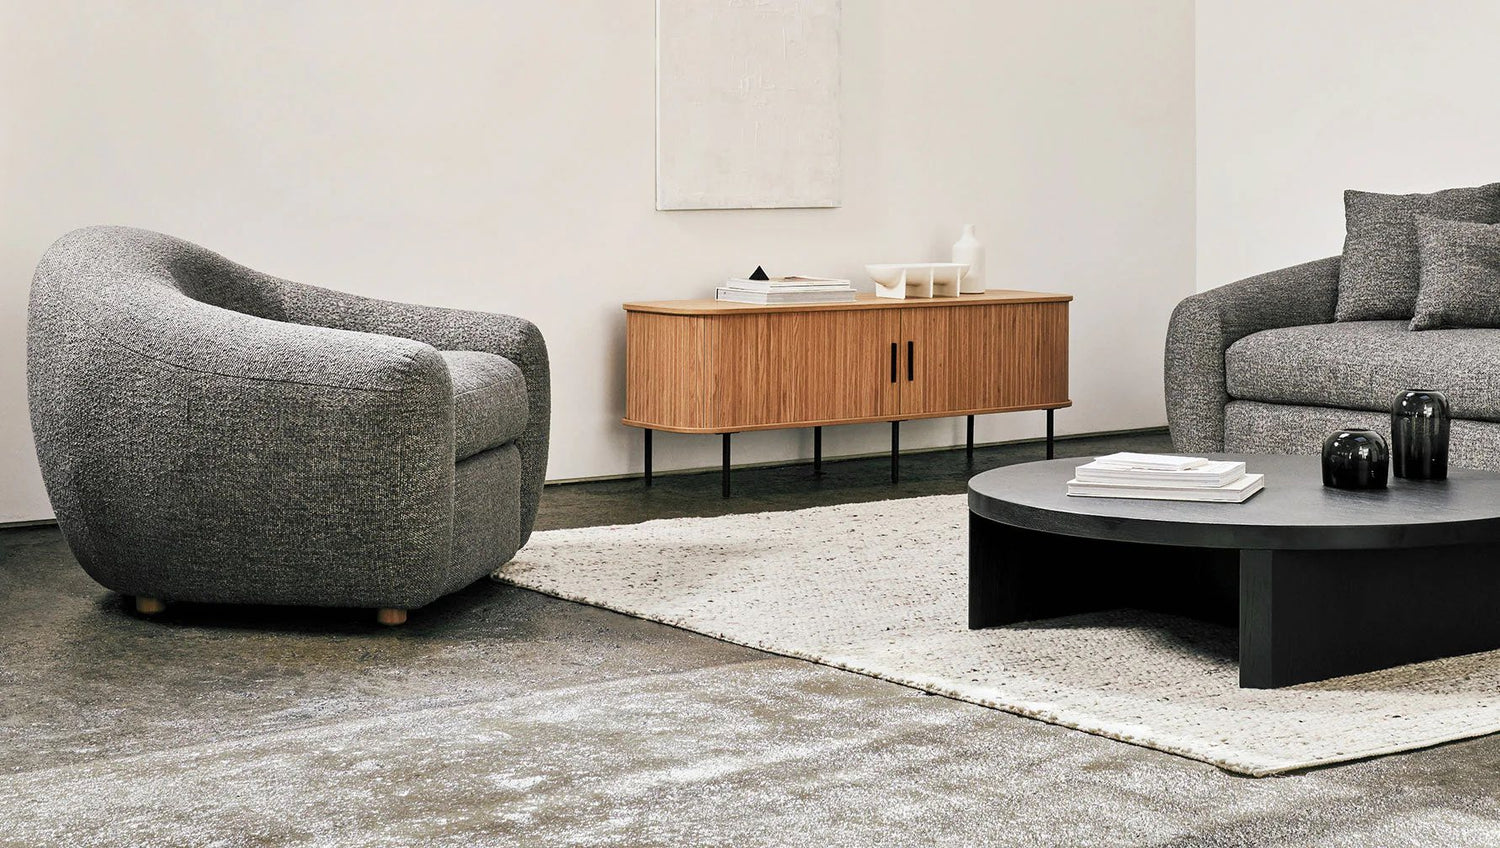 A modern living room featuring a gray upholstered armchair and sofa, a rectangular wooden cabinet with angled legs, and a low, round black coffee table on a light-colored rug. The walls are white and there's minimal decor, creating a clean and minimalist aesthetic.